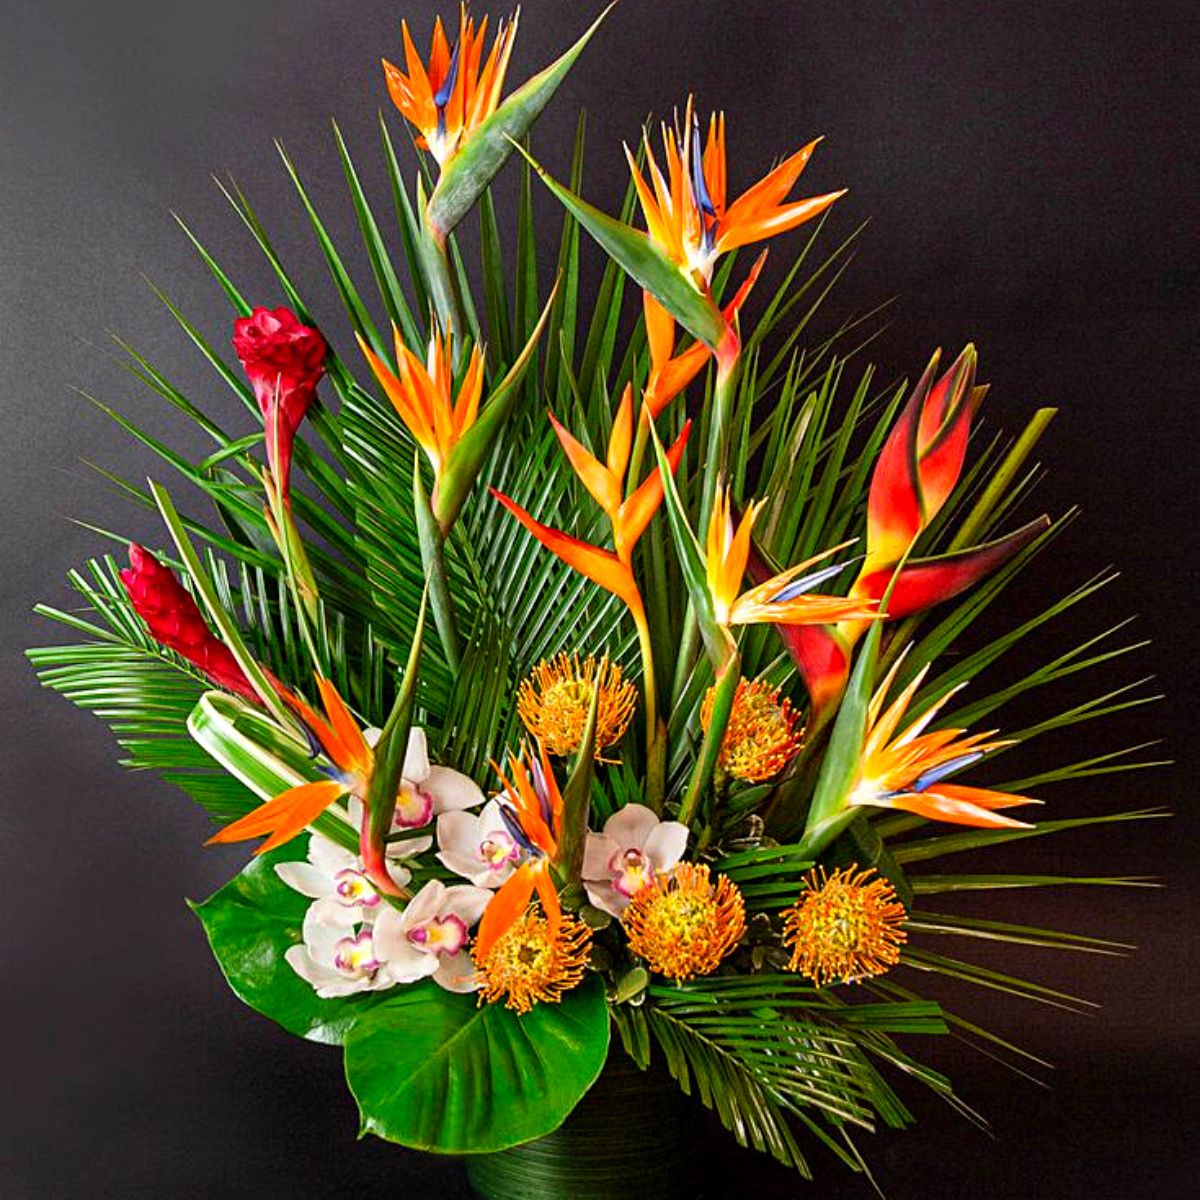 Bird of Paradise in Floral Compositions